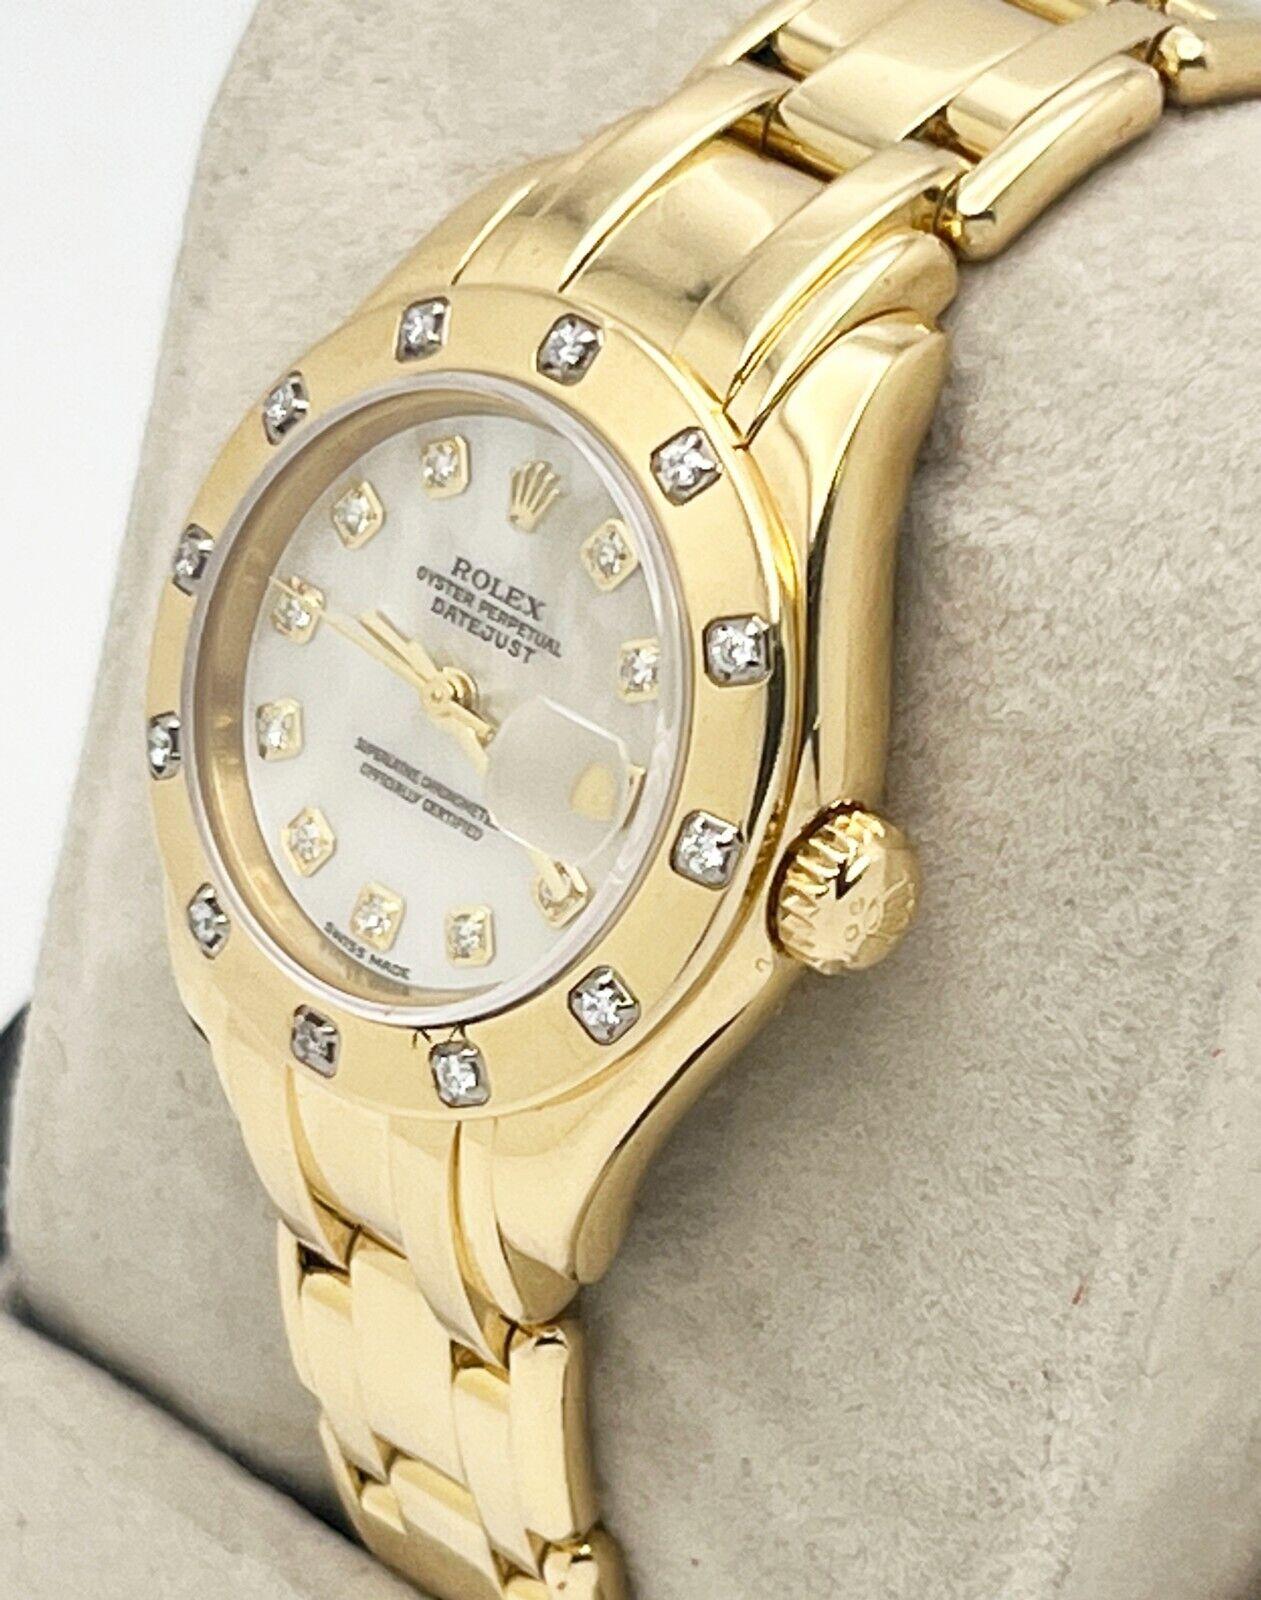 Style Number: 80318

 

Serial: F581***


Year: 2003

 

Model: Ladies Pearlmaster

 

Case Material: 18K Yellow Gold

 

Band: 18K Yellow Gold

  

Bezel: Factory Scattered Diamond Bezel

 

Dial: Factory Mother of Pearl Diamond Dial

 

Face: